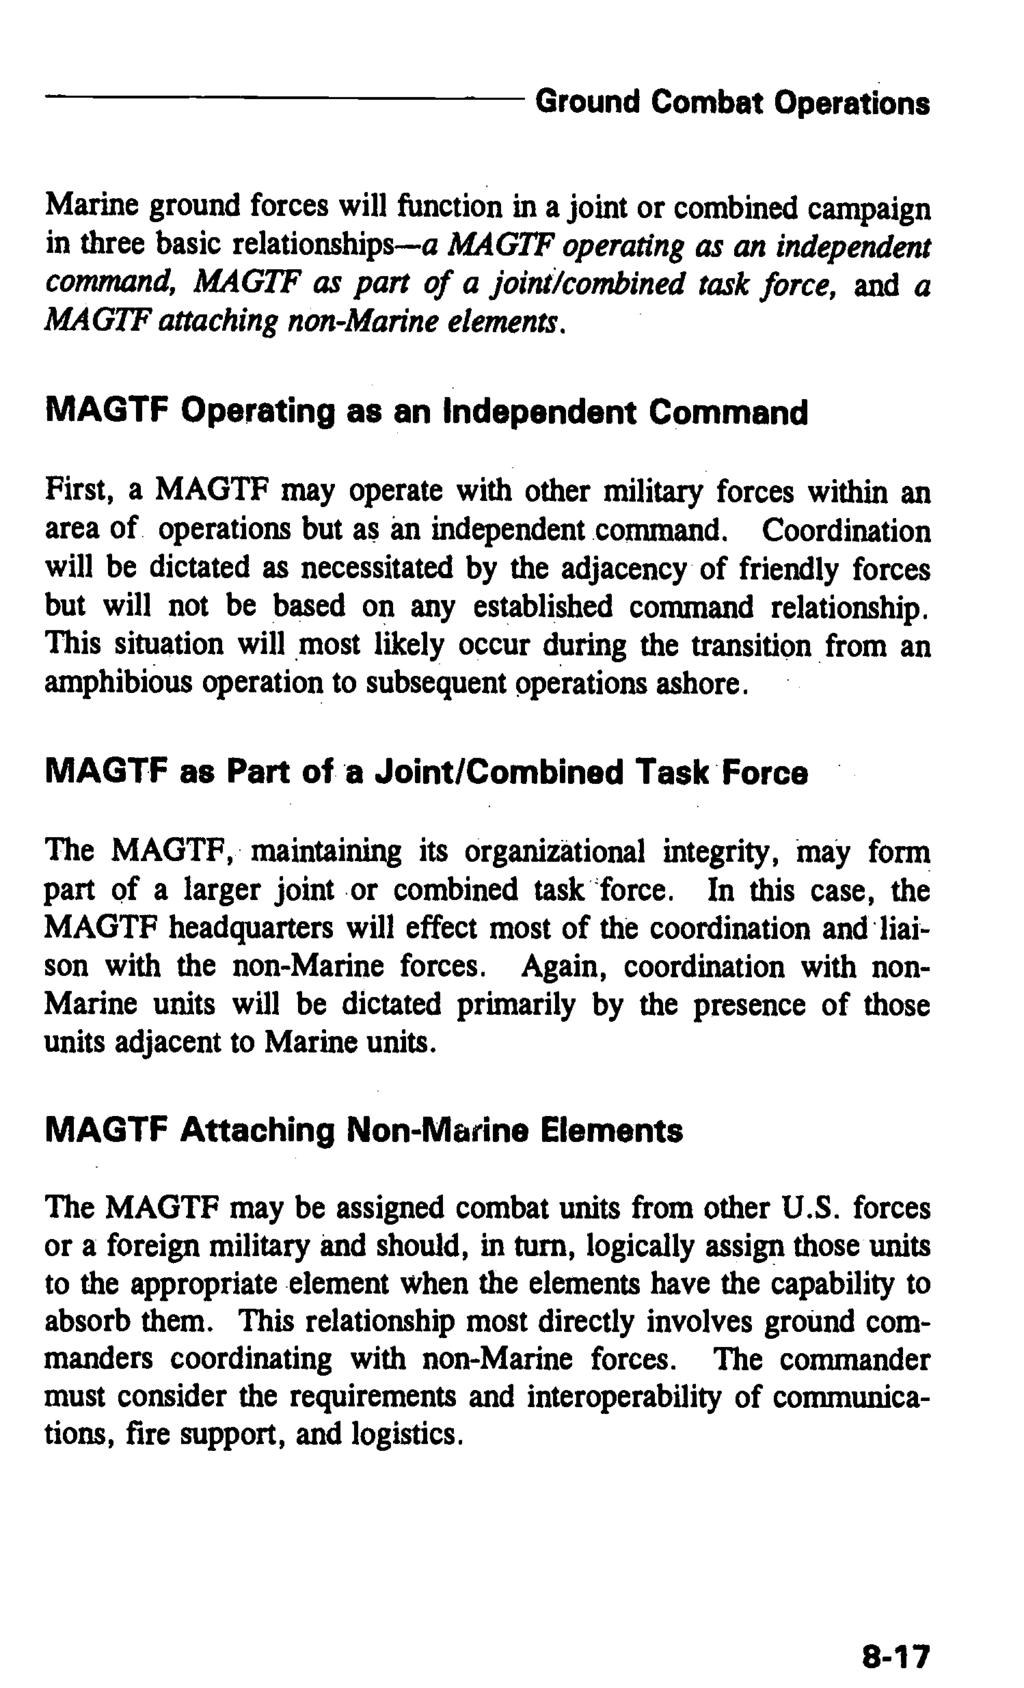 Ground Combat Operations Marine ground forces will function in a joint or combined campaign in three basic relationships a MAGTF operating as an independeiu command, MAGTF as part of a joint/combined